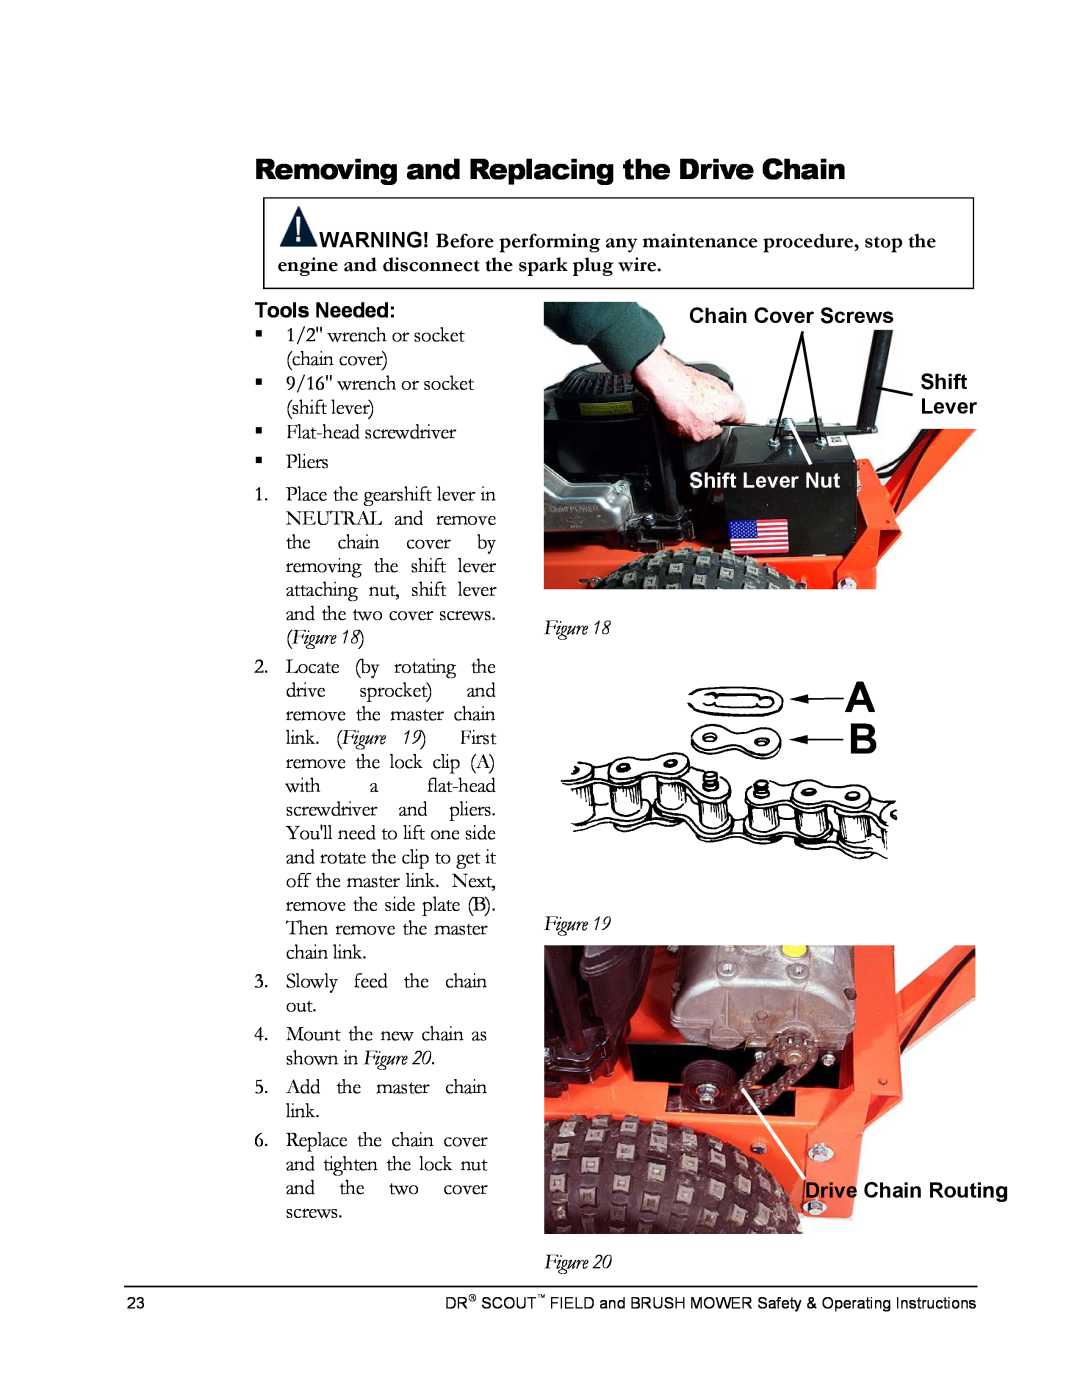 Country Home Products DR SCOUT FIELD and BRUSH MOWER manual Removing and Replacing the Drive Chain, Shift Lever Nut 